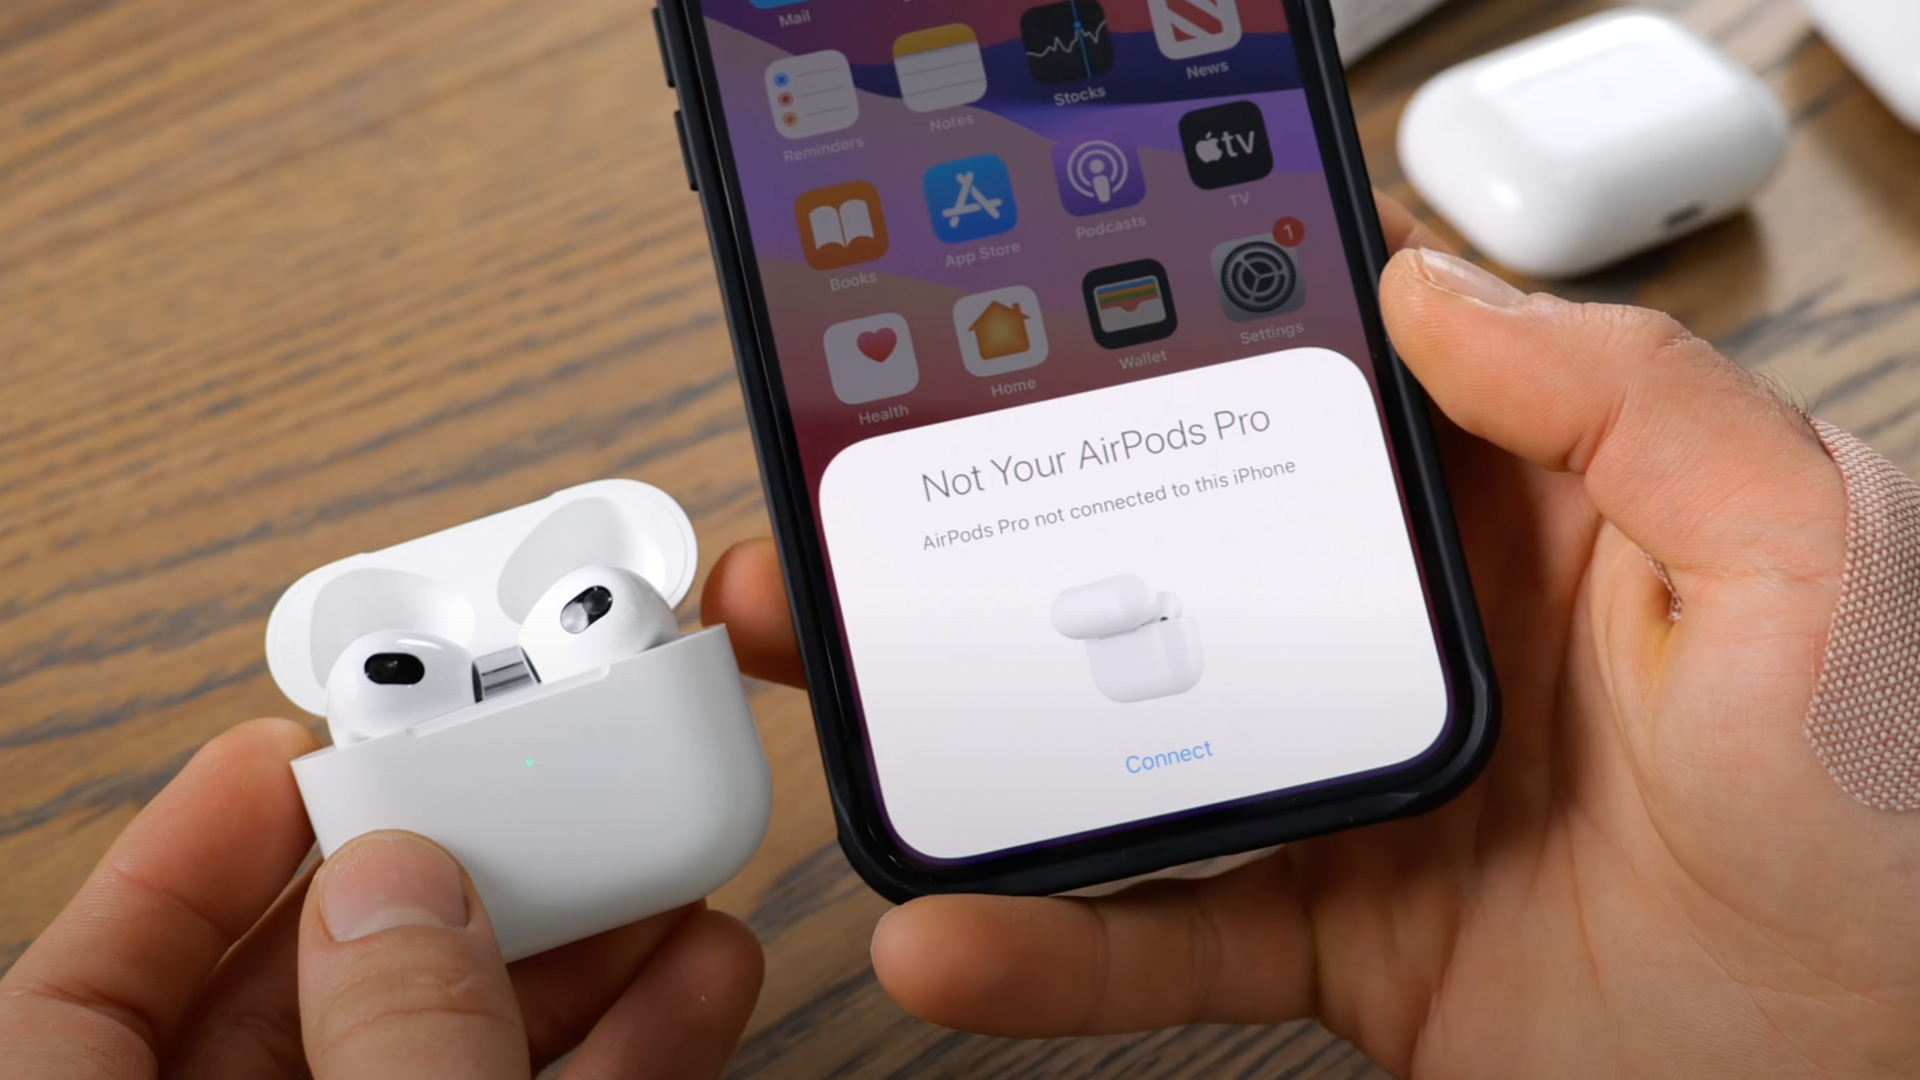 Air pods 3 apple. AIRPODS 3 iphone 12. Iphone 13 Max AIRPODS. Iphone 13 Pro AIRPODS Pro. Air pods 3 оригинал.